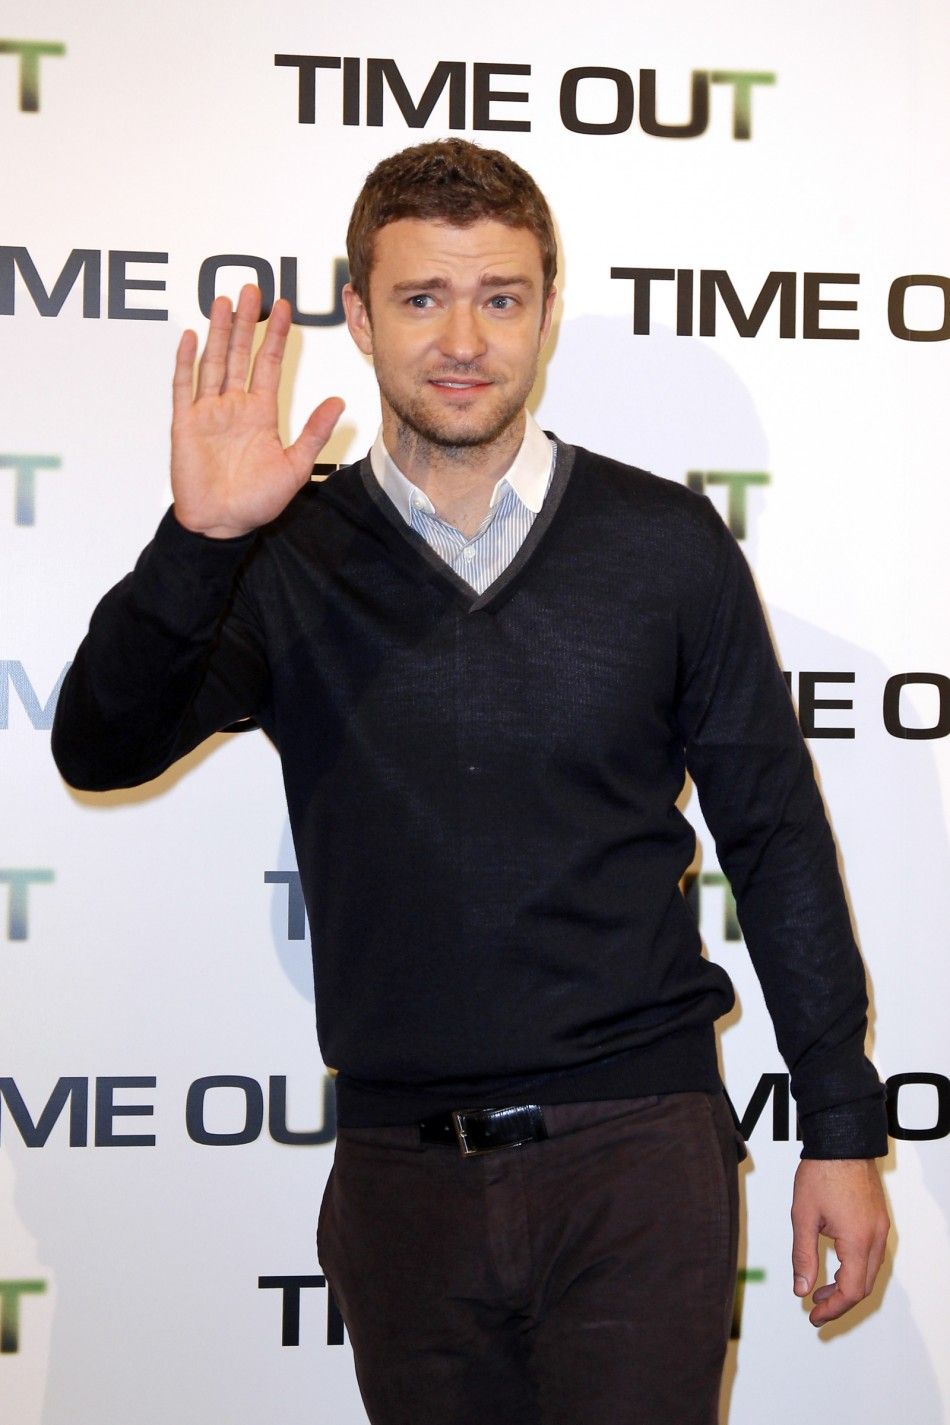 Cast member Justin Timberlake poses for photographers to promote his latest movie quotIn Timequot in Paris